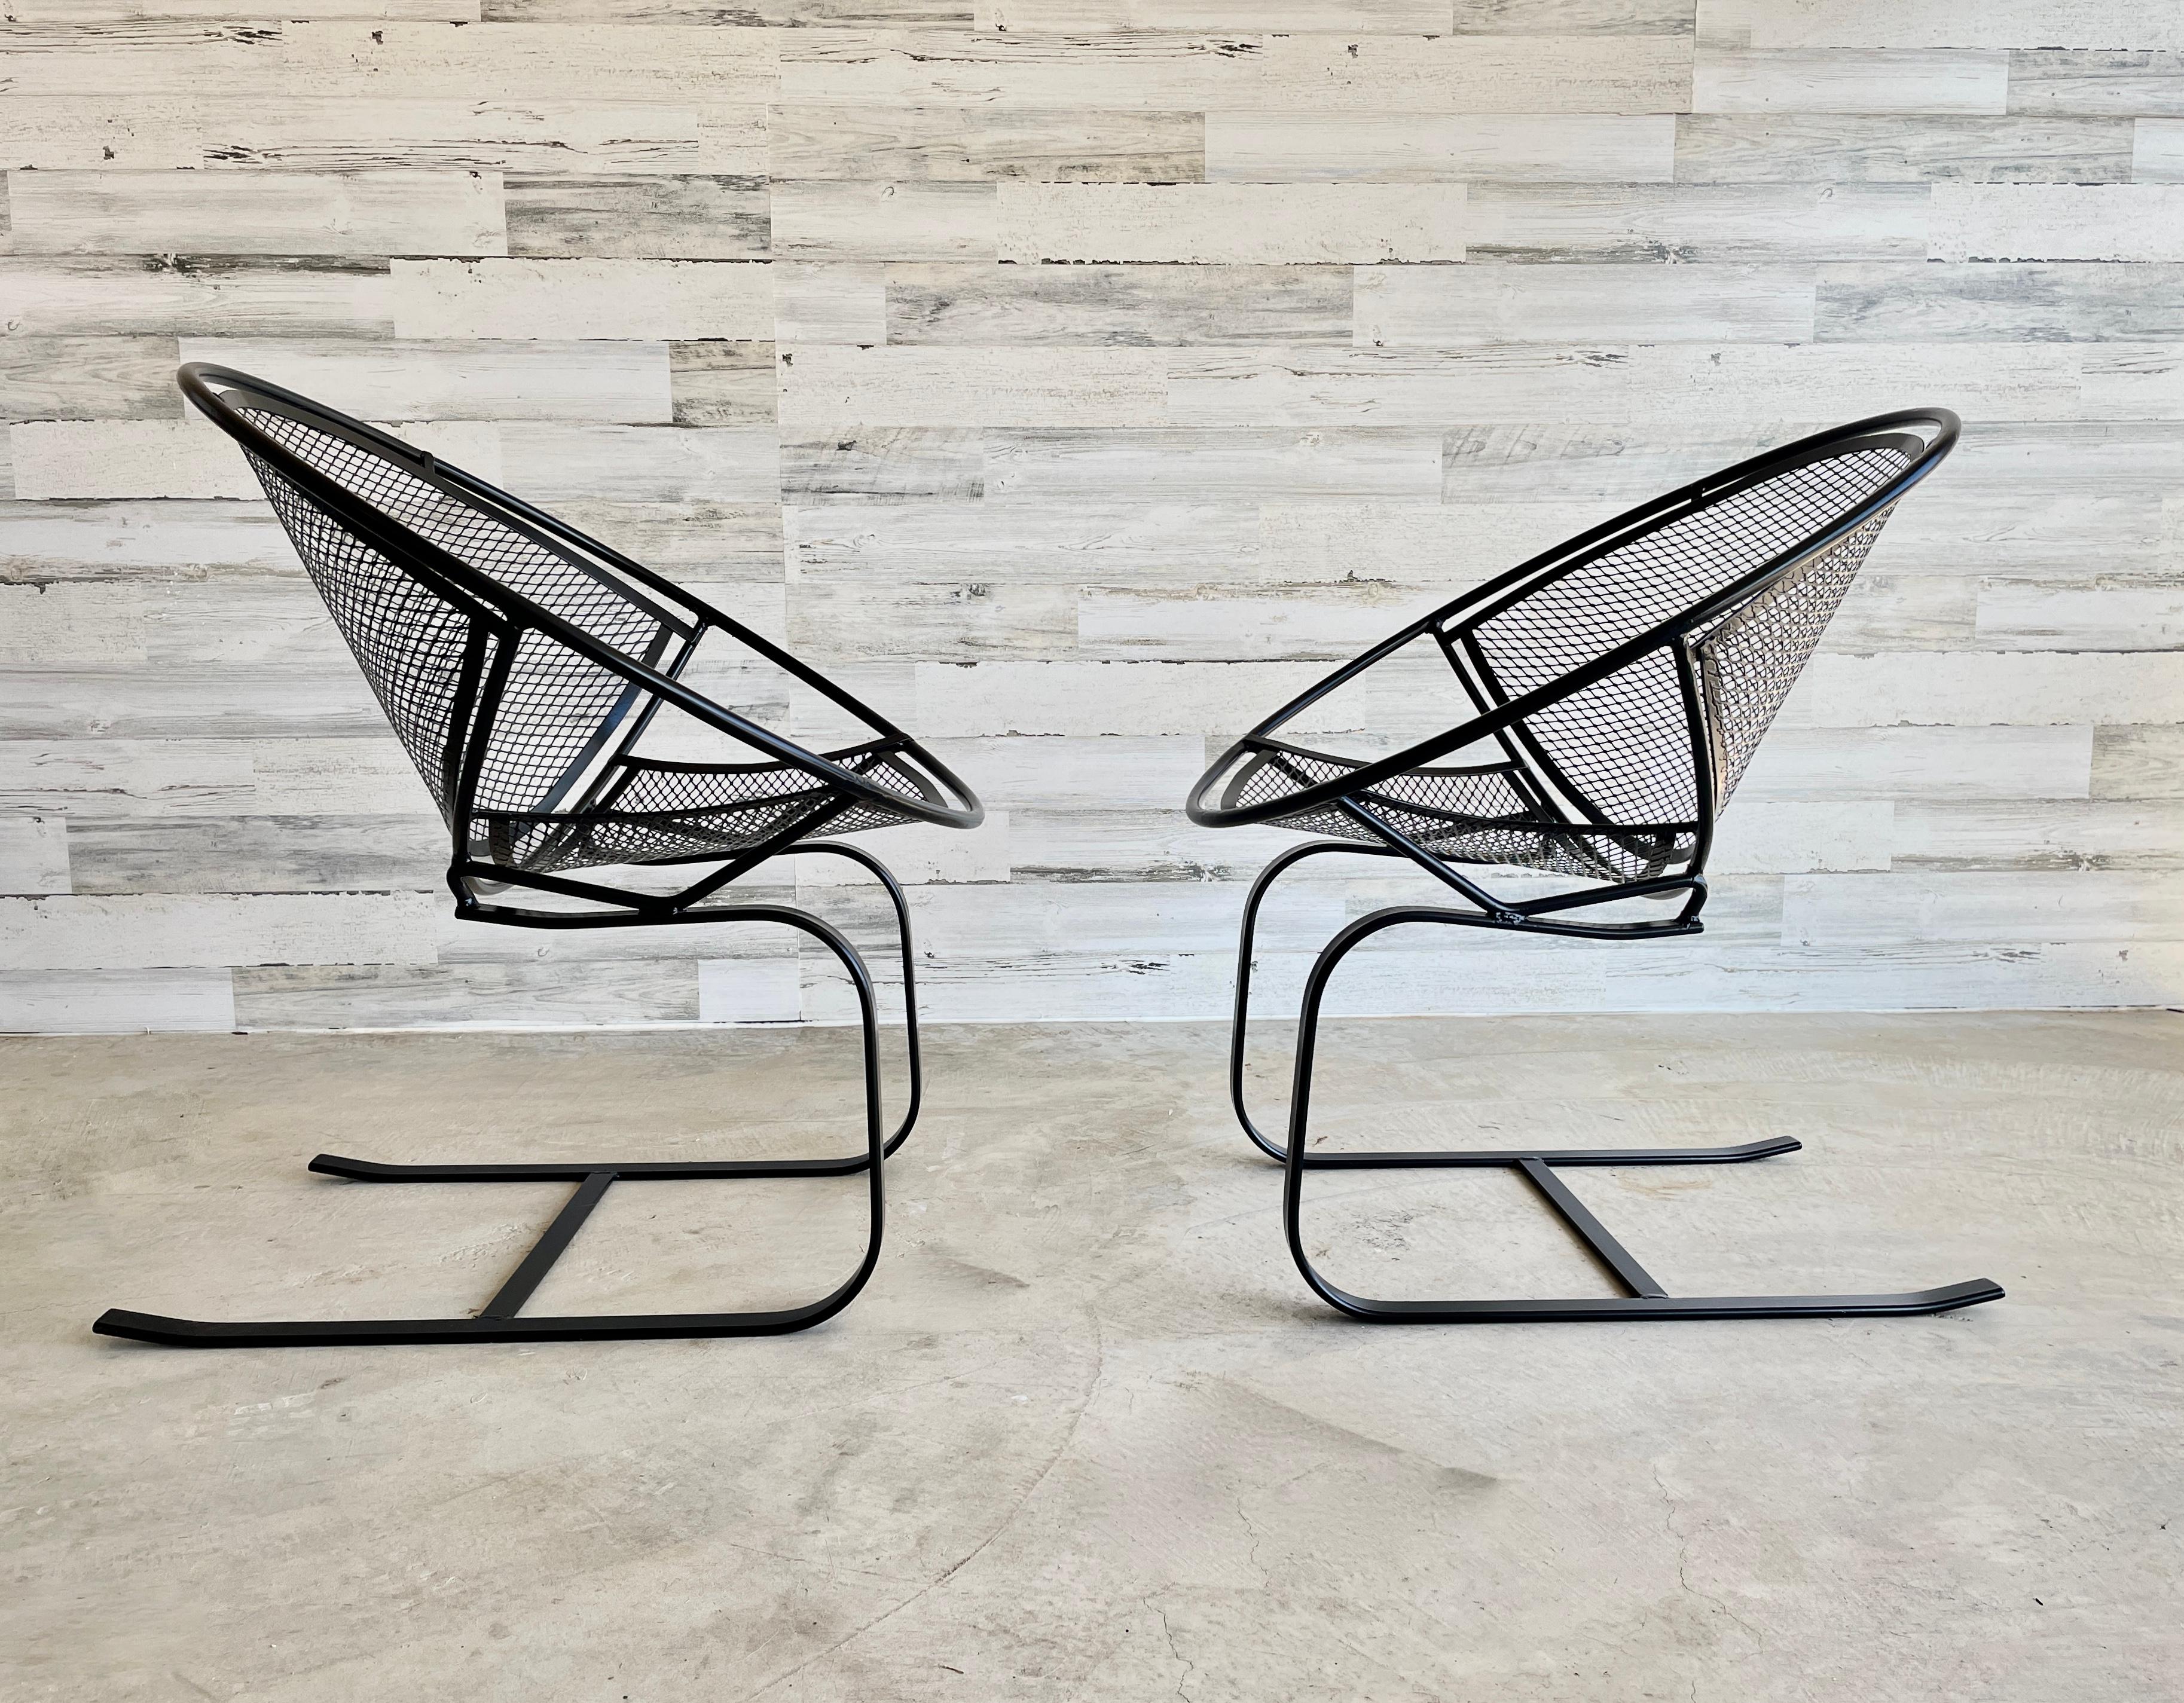 Vintage cantilevered Patio lounge chairs designed by Maurizio Tempestini for Salterini.
Professionally powder coated in satin black . 

Tete a tete and coffee table not included at this price.